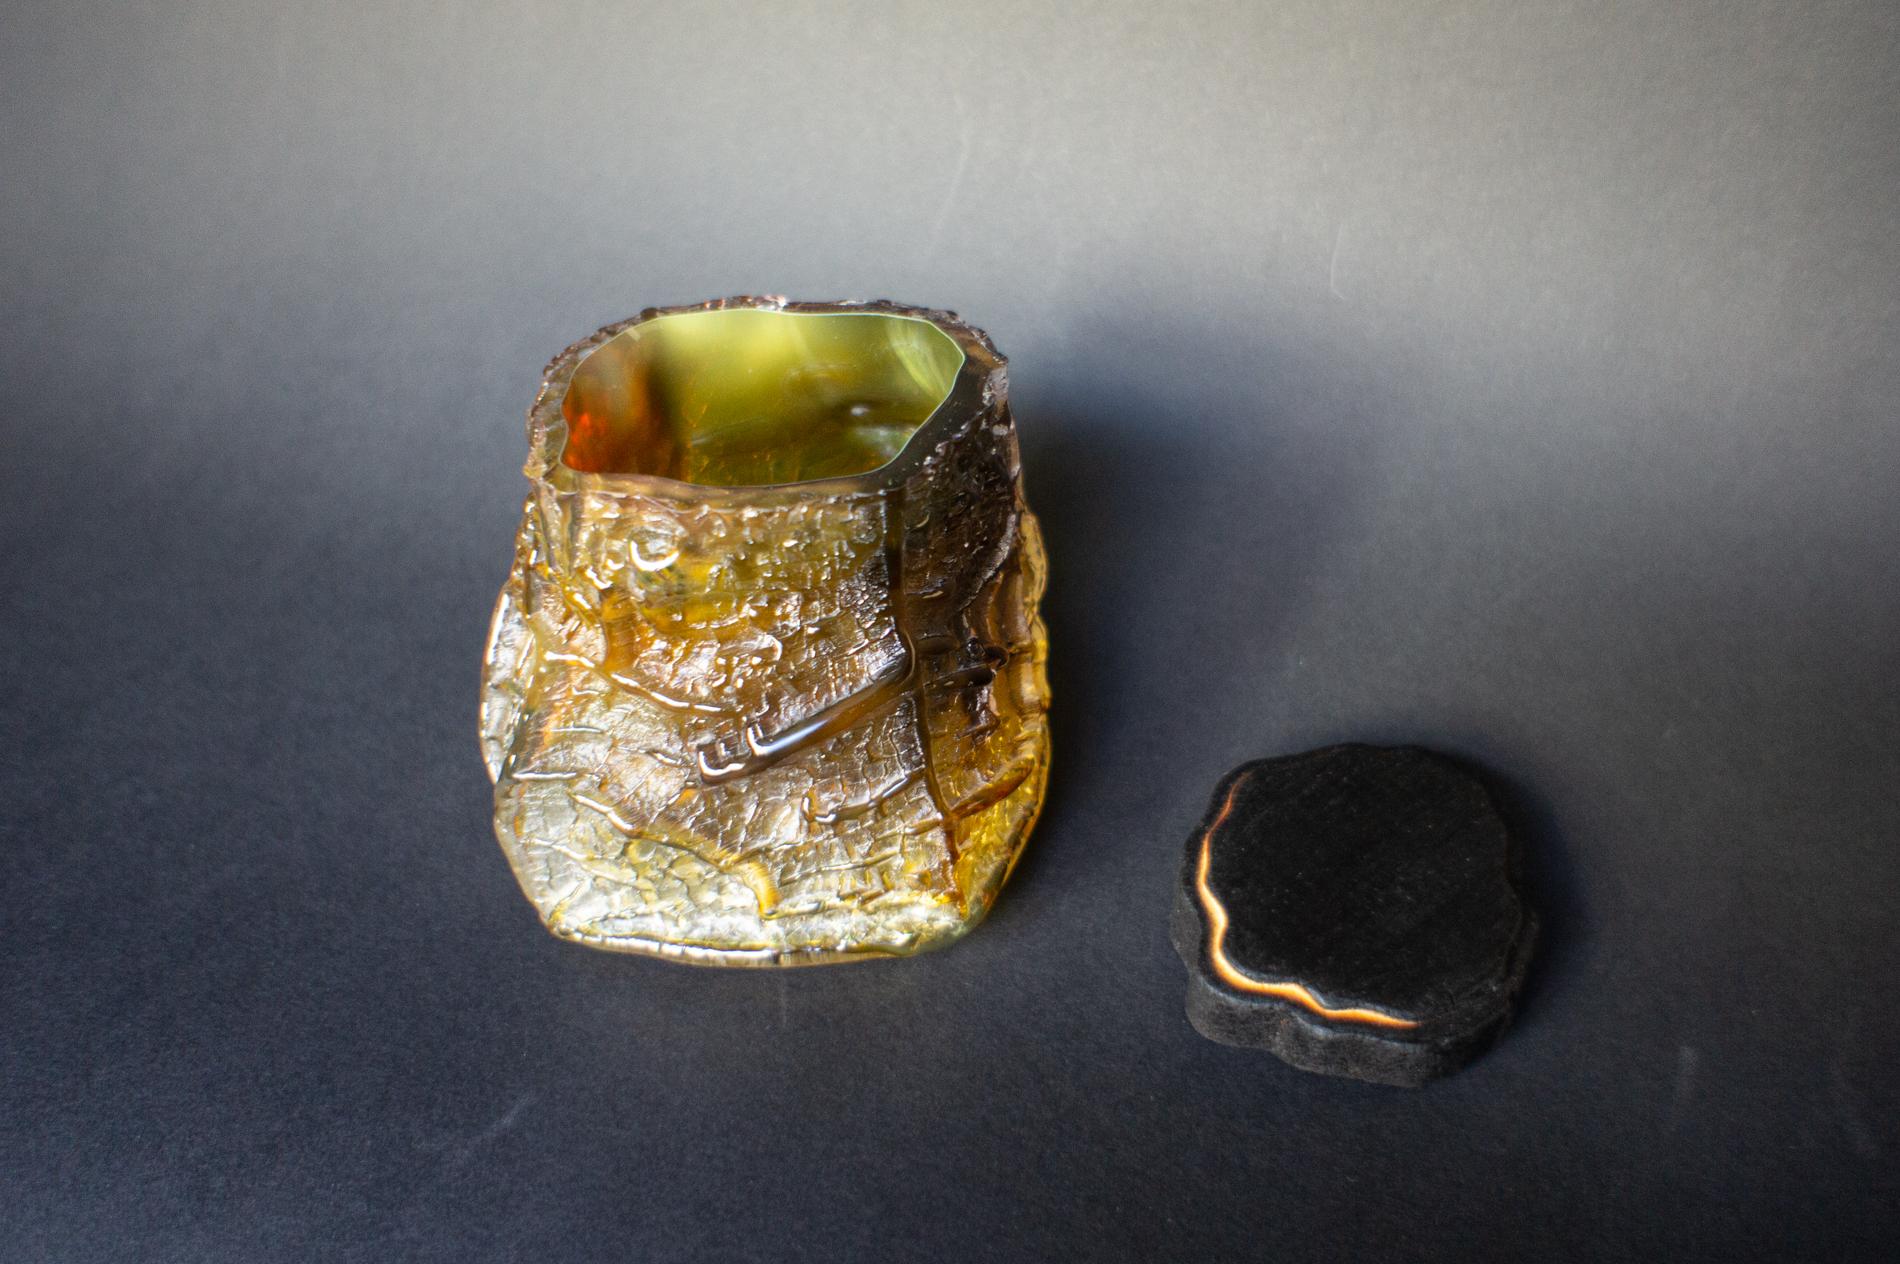 Drago — a pair of two glass treasuries, golden dragon & grounded brown - Gray Still-Life Sculpture by Katerina Krotenko